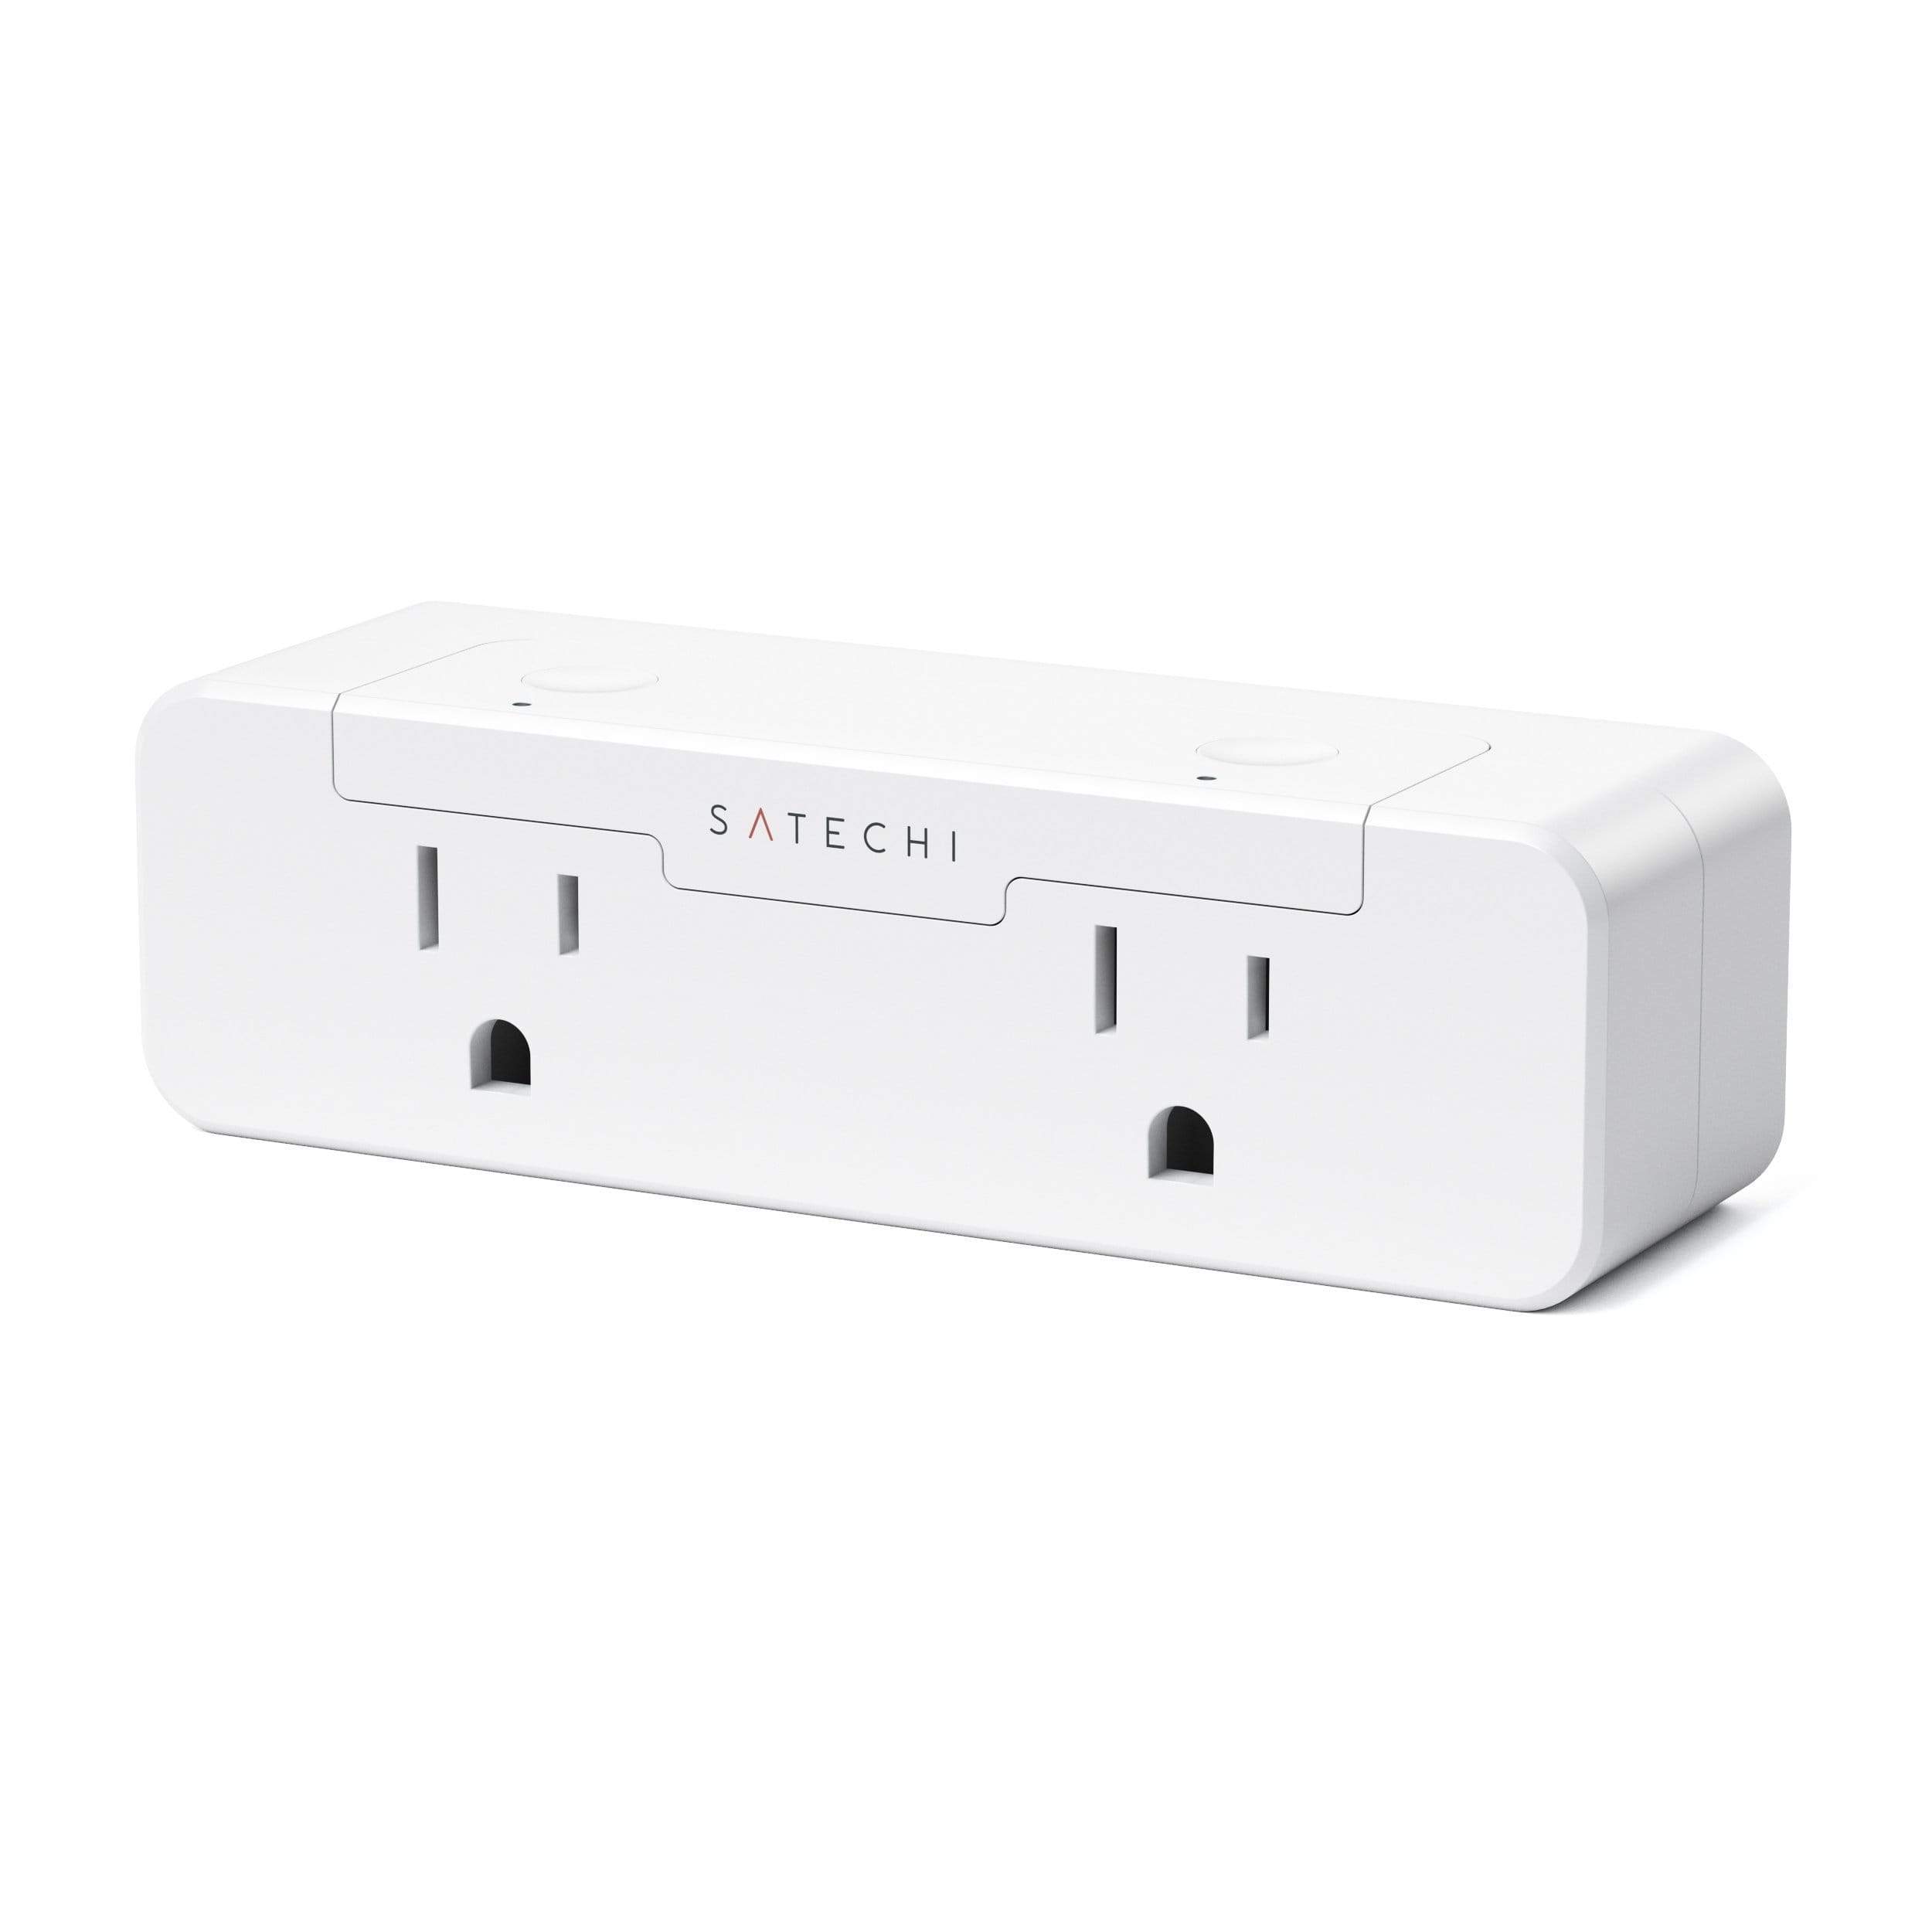 Dual Smart Outlet - Works with Apple HomeKit Wall Chargers Satechi USA 